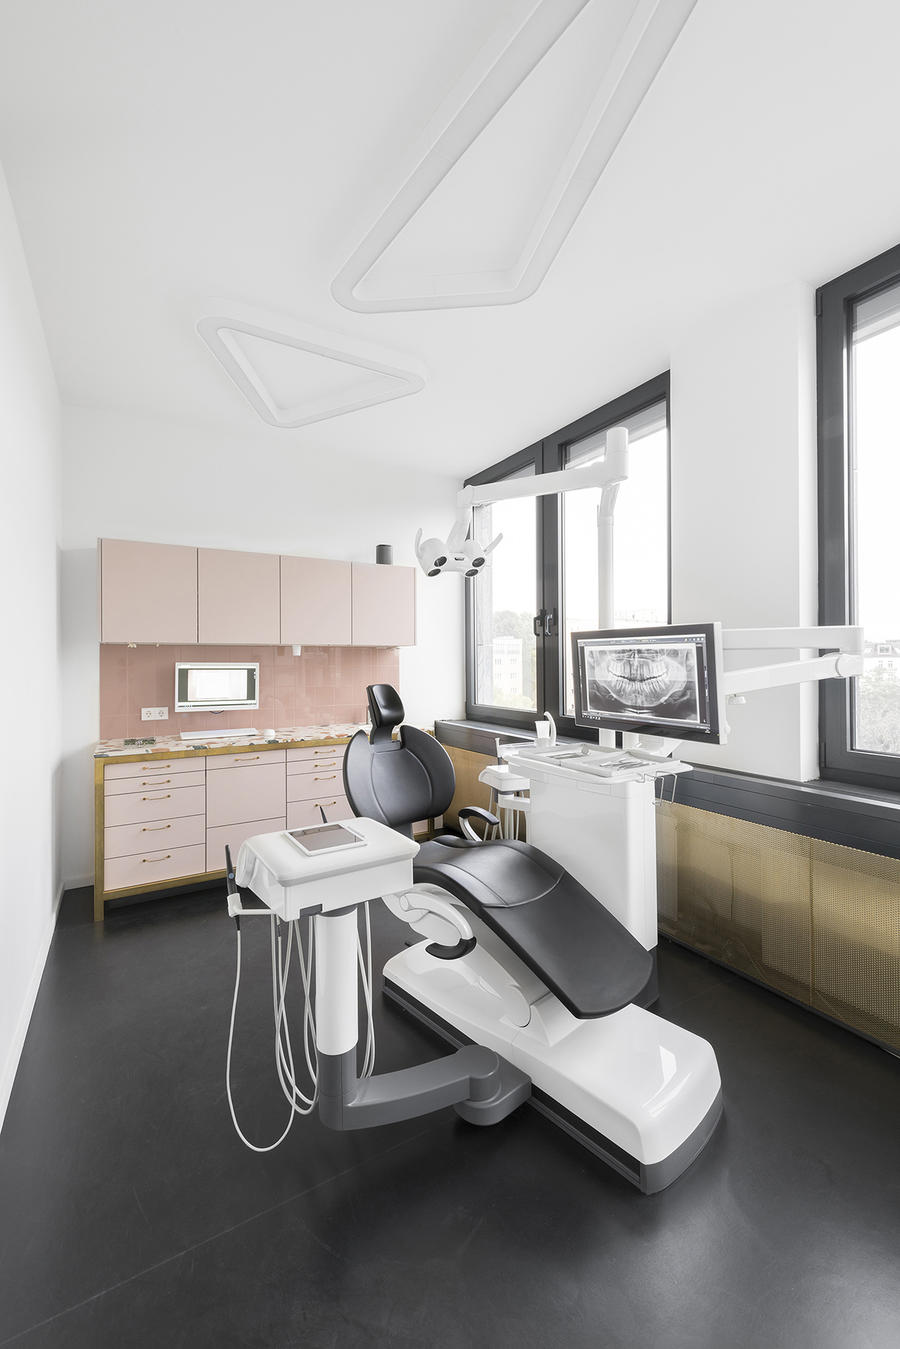 On the mend: How cutting-edge design plays a role in patient wellness